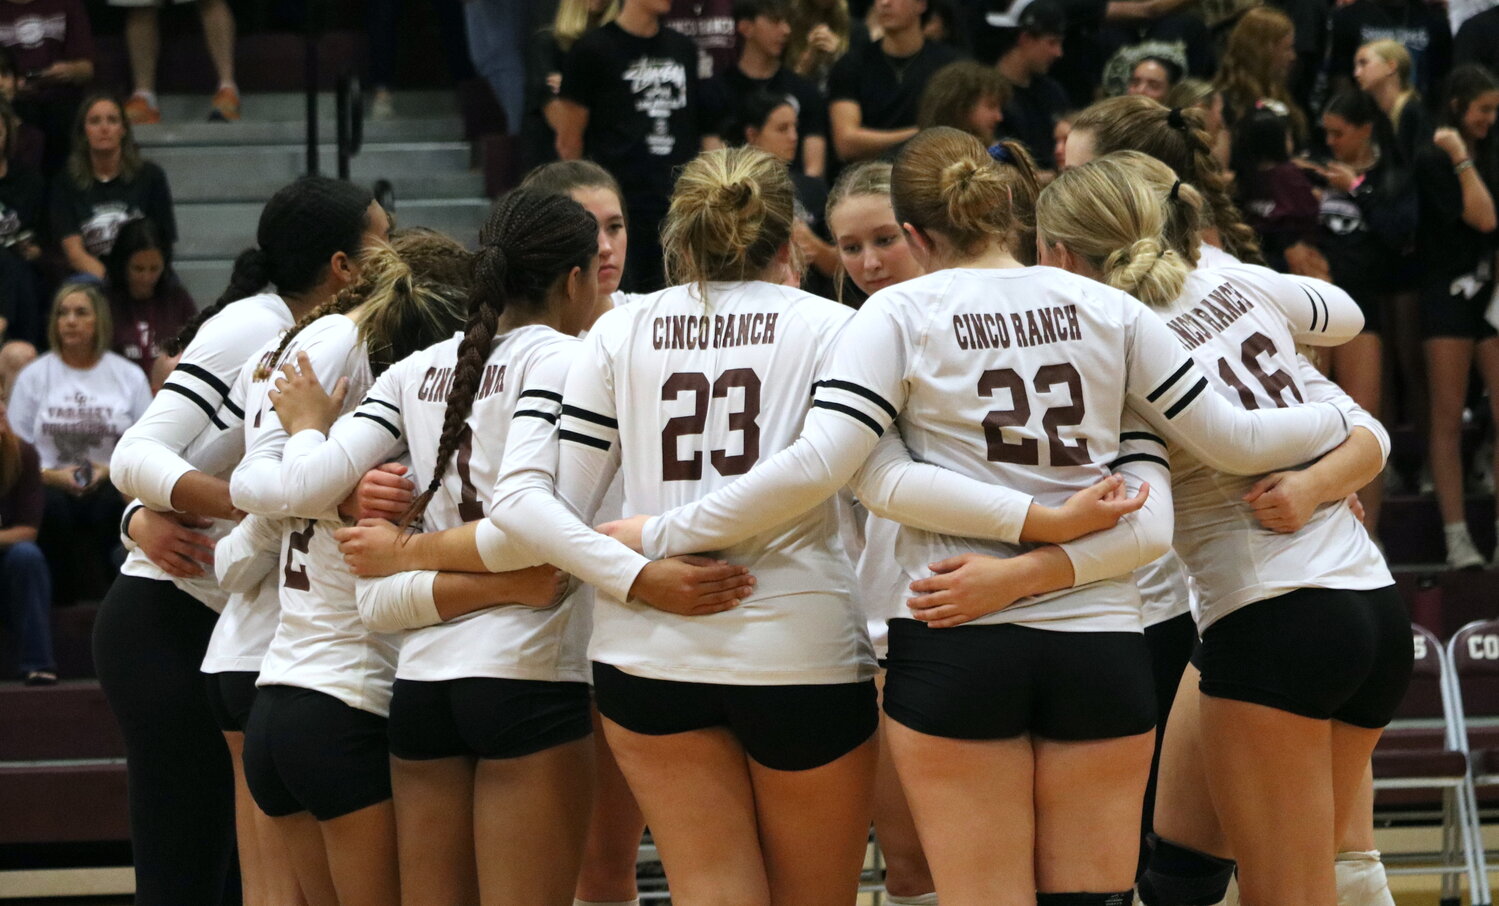 Cinco Ranch huddles before a match between Cinco ranch and Seven Lakes at the Cinco Ranch gym.